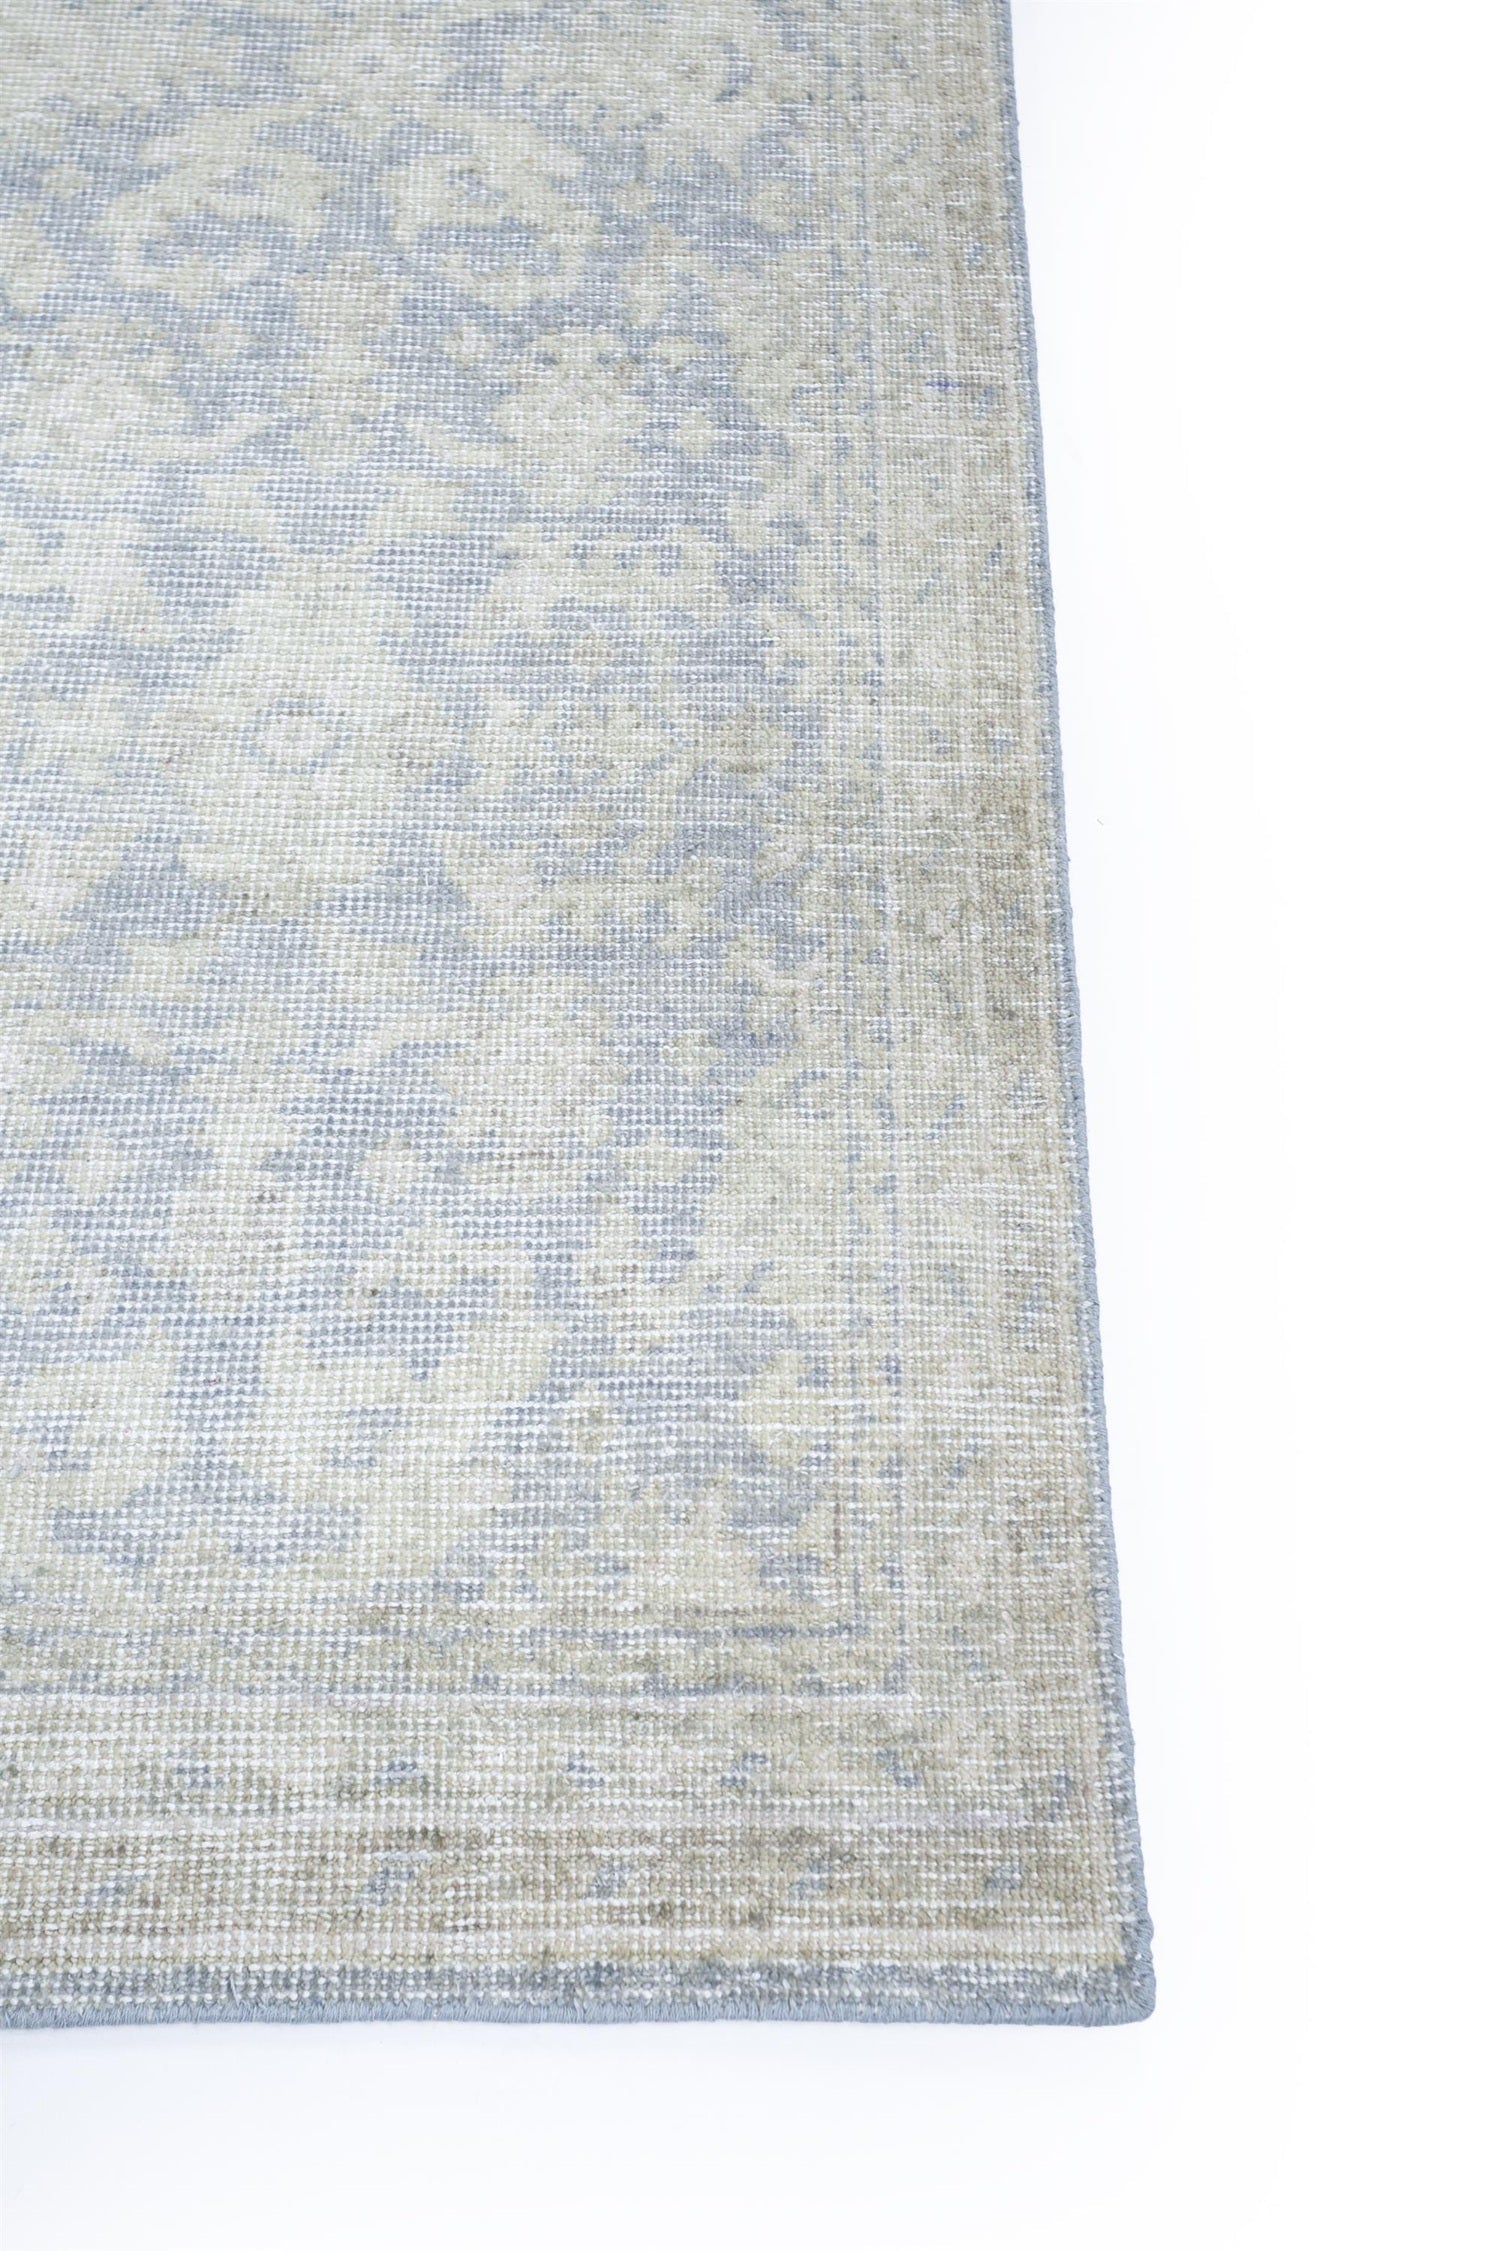 Sultanabad Handwoven Transitional Rug, J68853